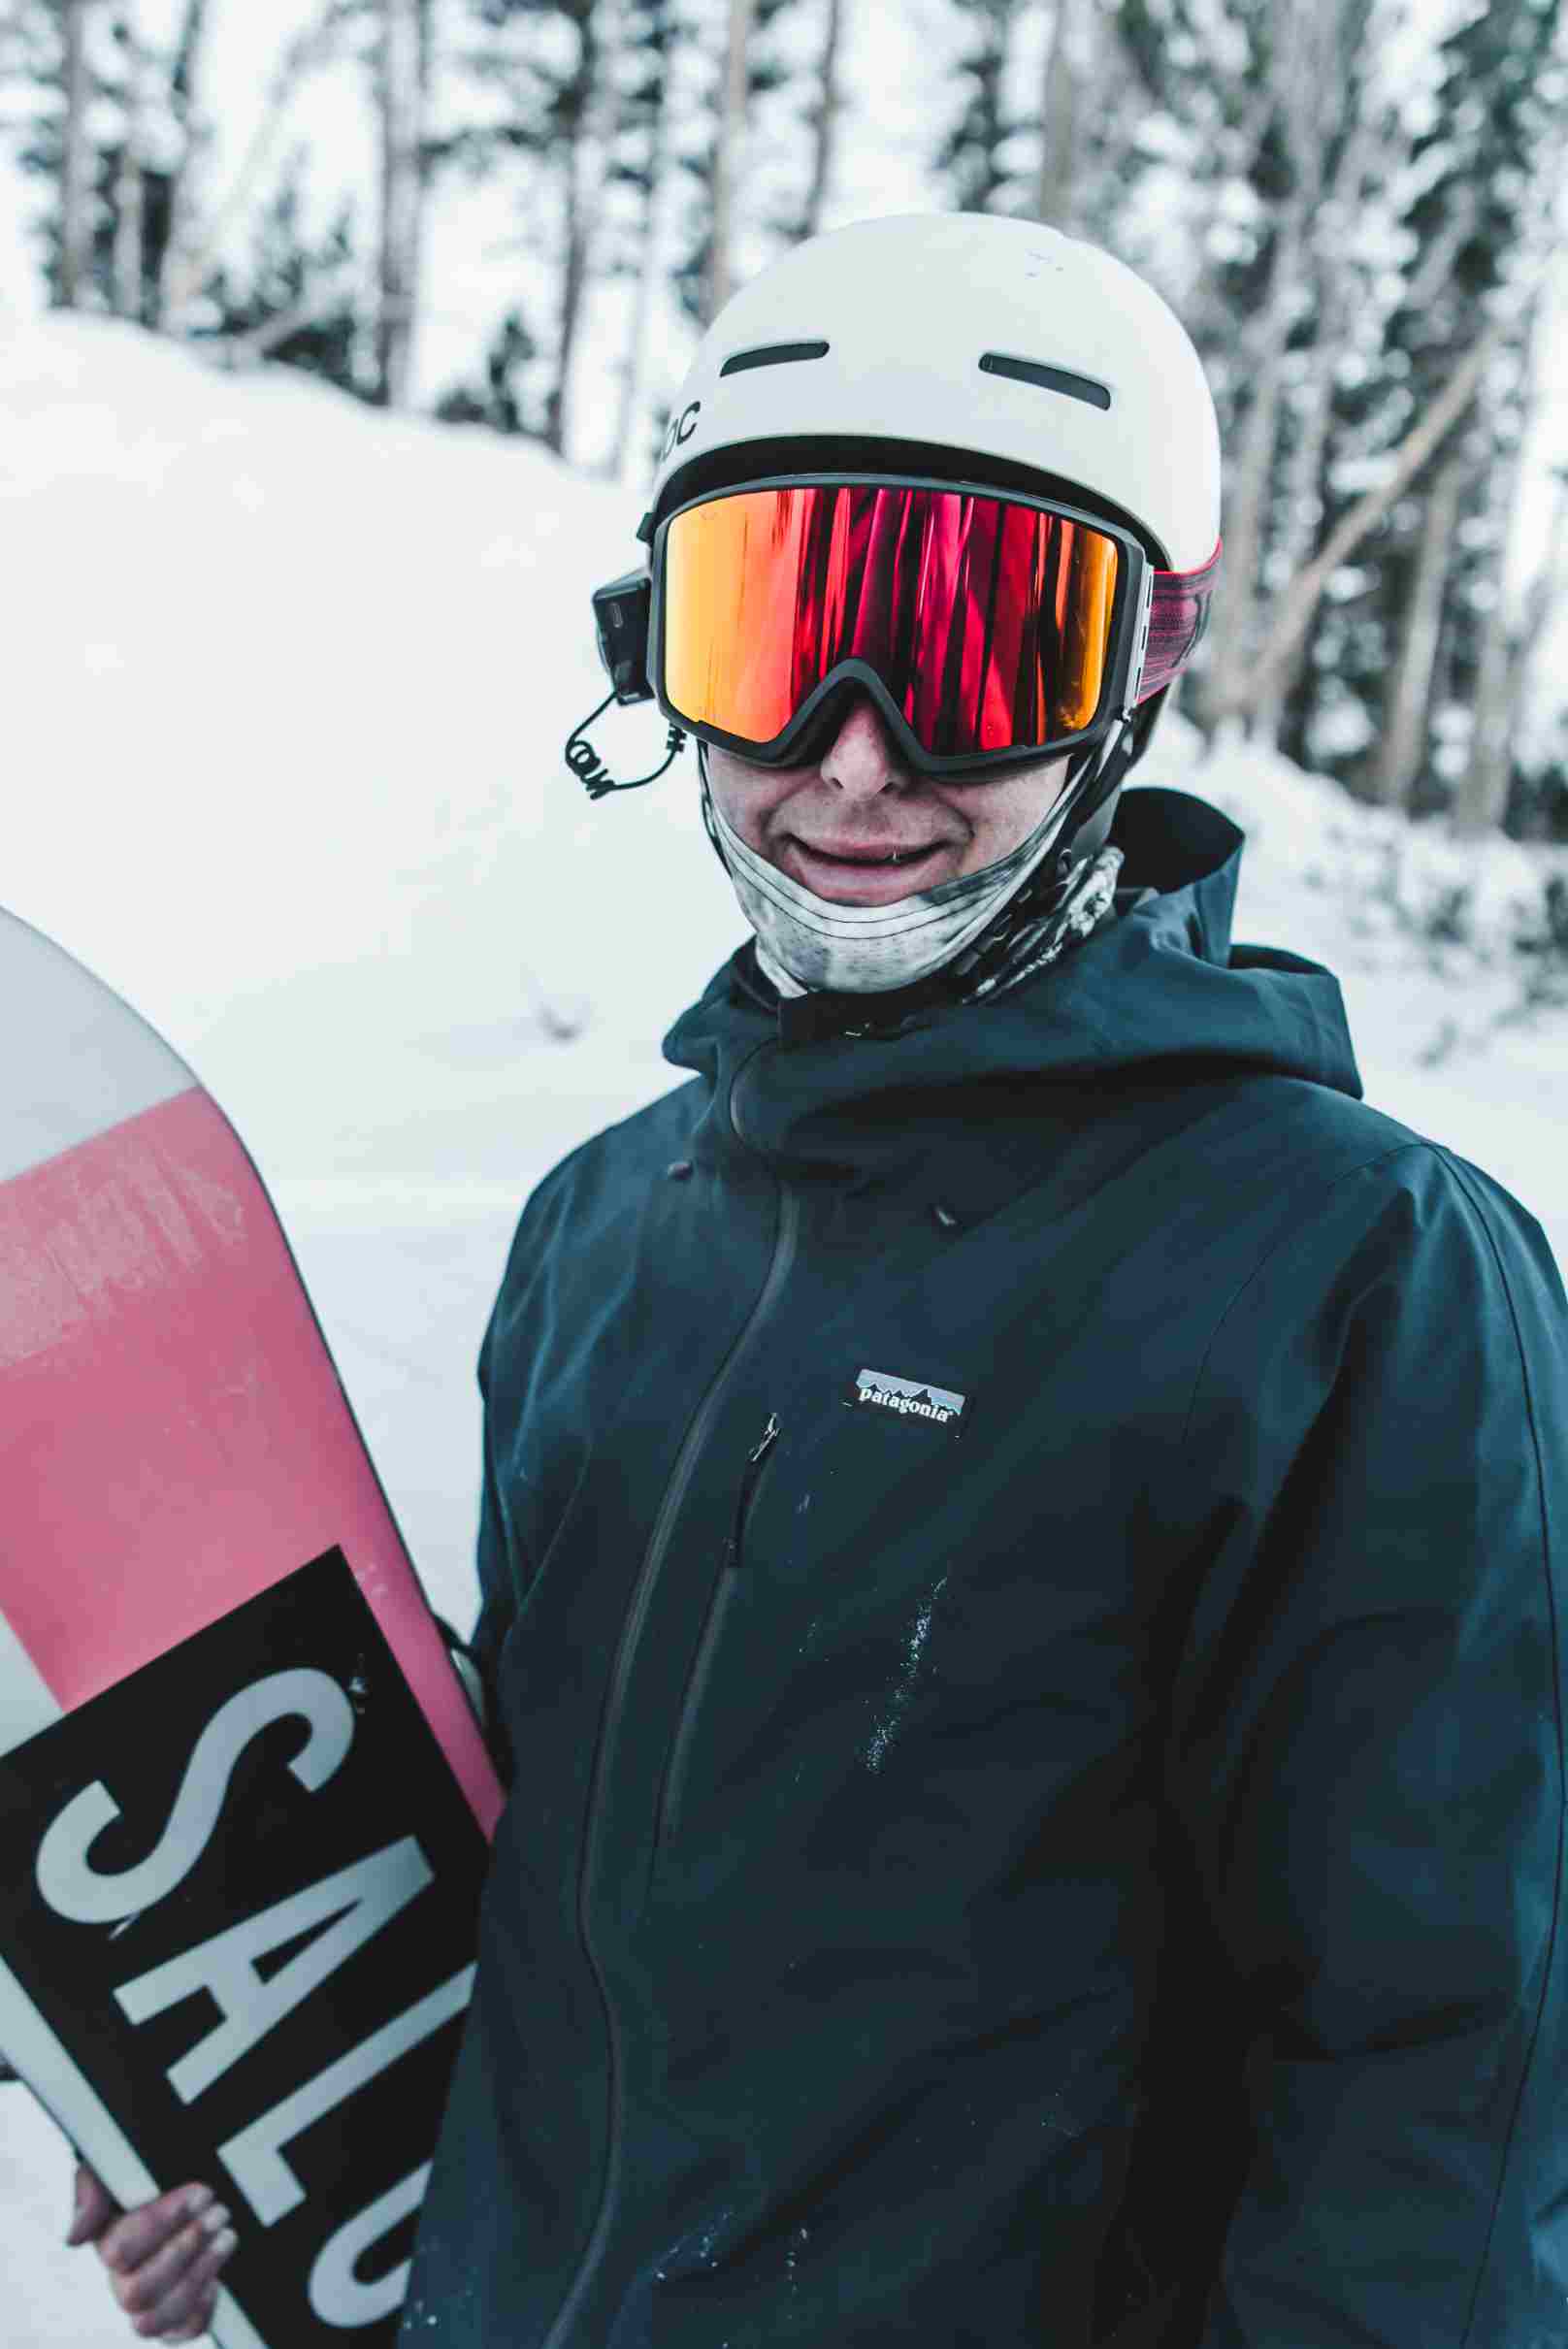 5 Reasons for wearing Glasses while Snowboarding